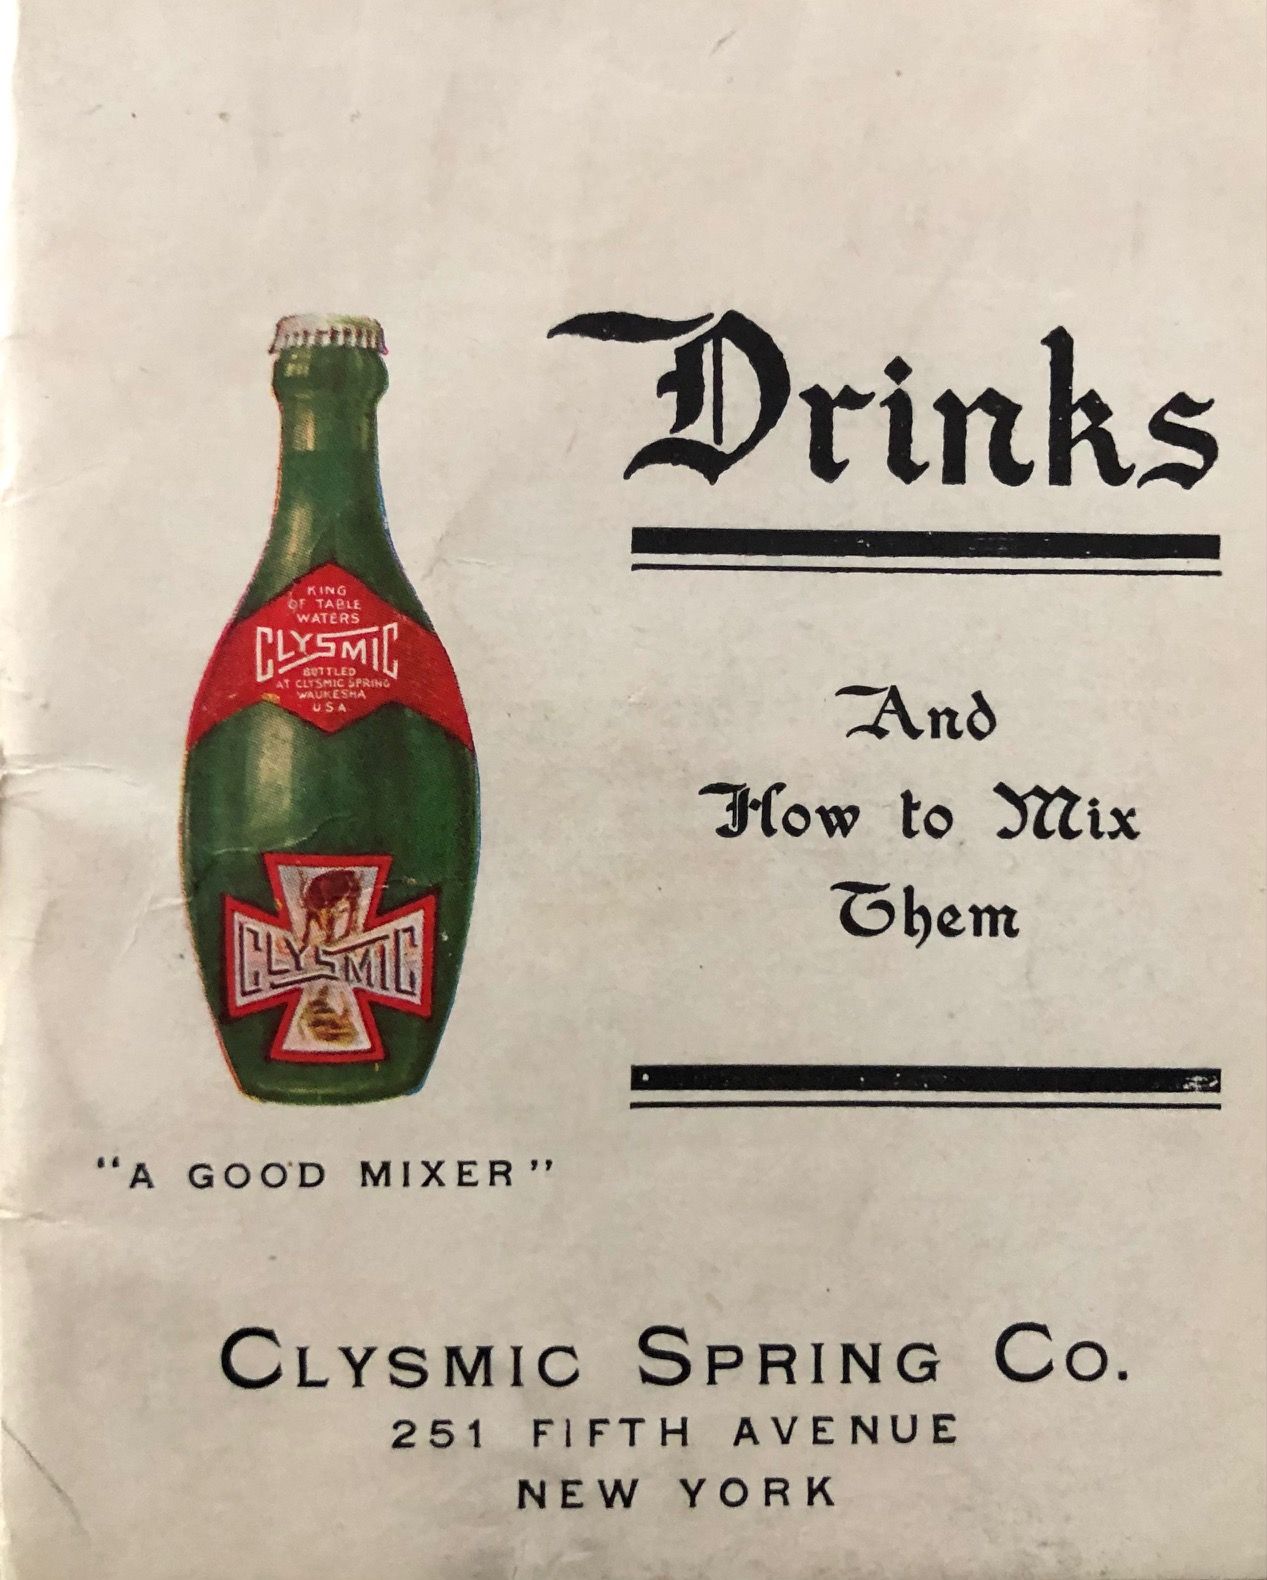 (Cocktails) Clysmic Spring. Drinks and How to Mix Them